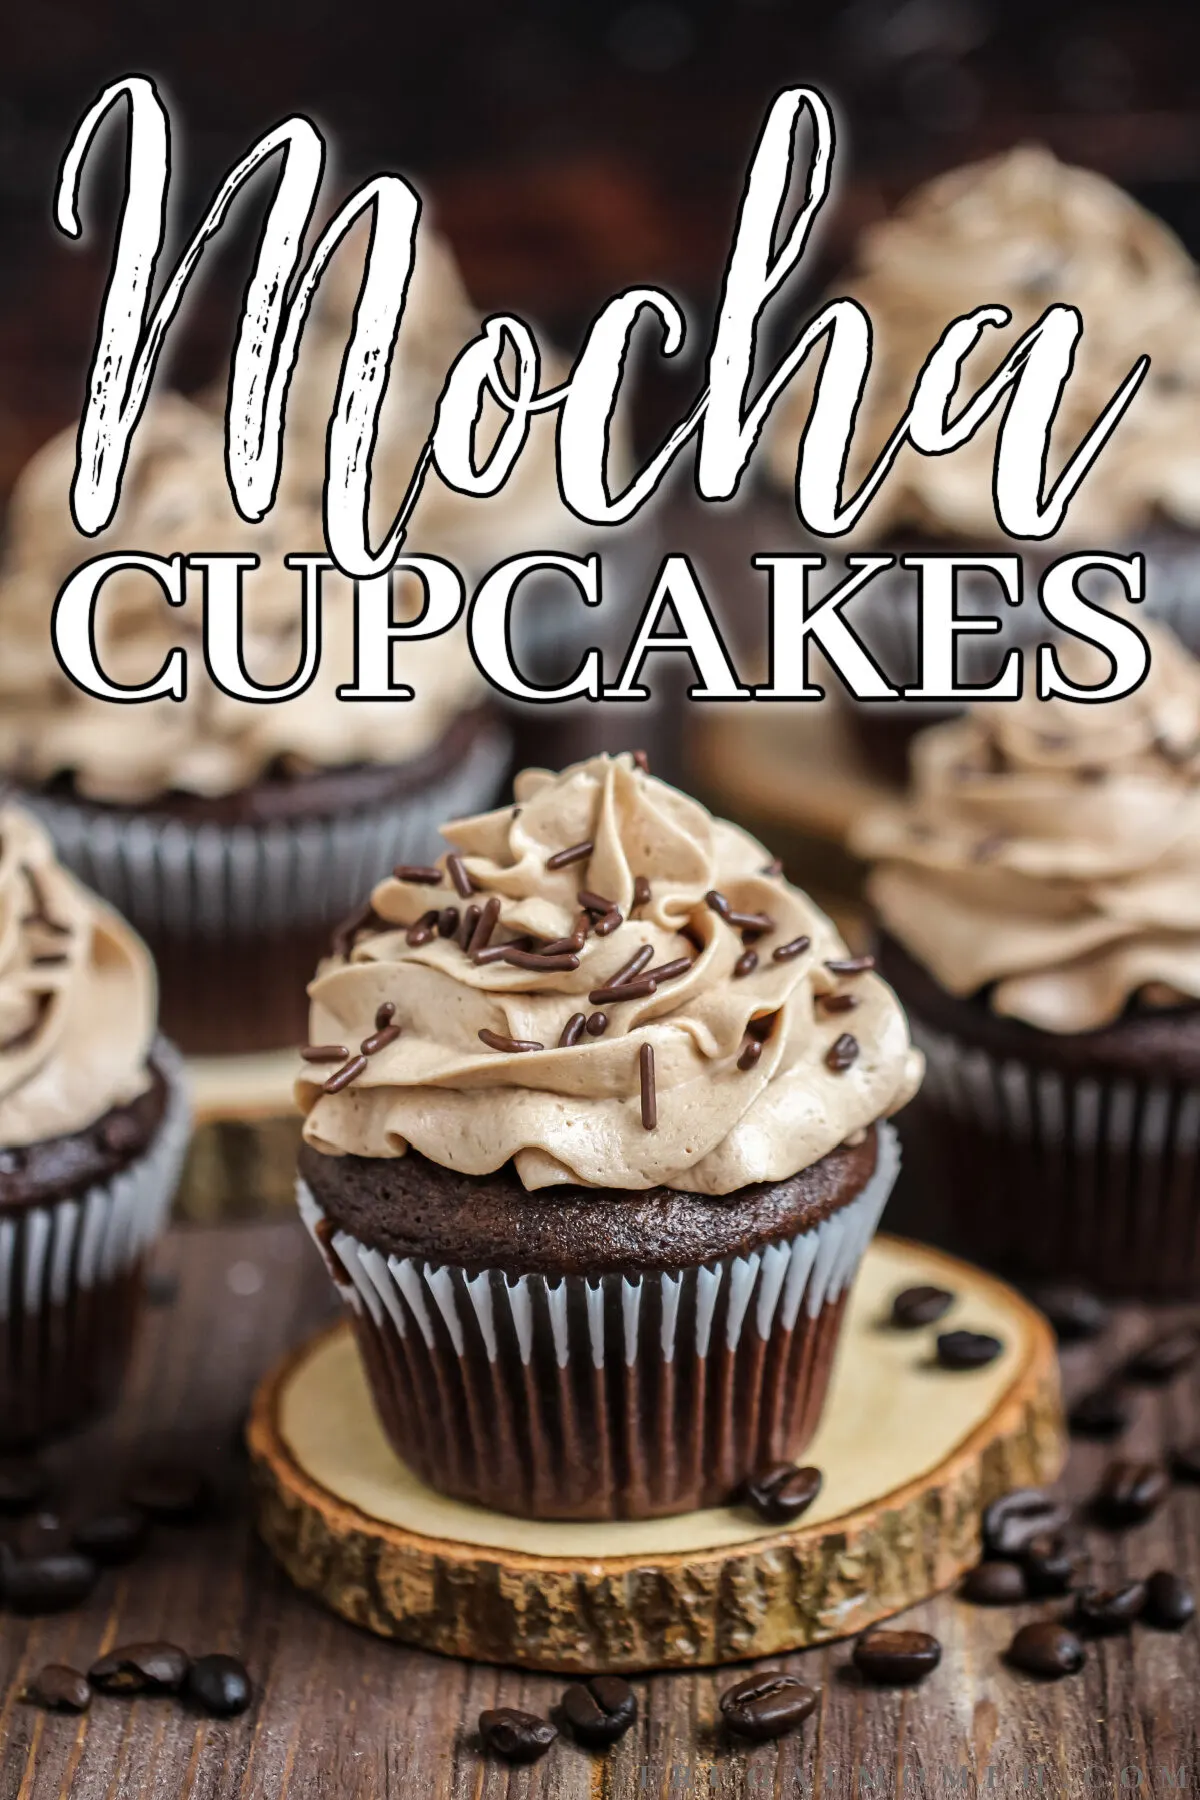 Love chocolate and coffee? Then you'll love this recipe for moist and fluffy mocha cupcakes with fluffy mocha buttercream frosting.